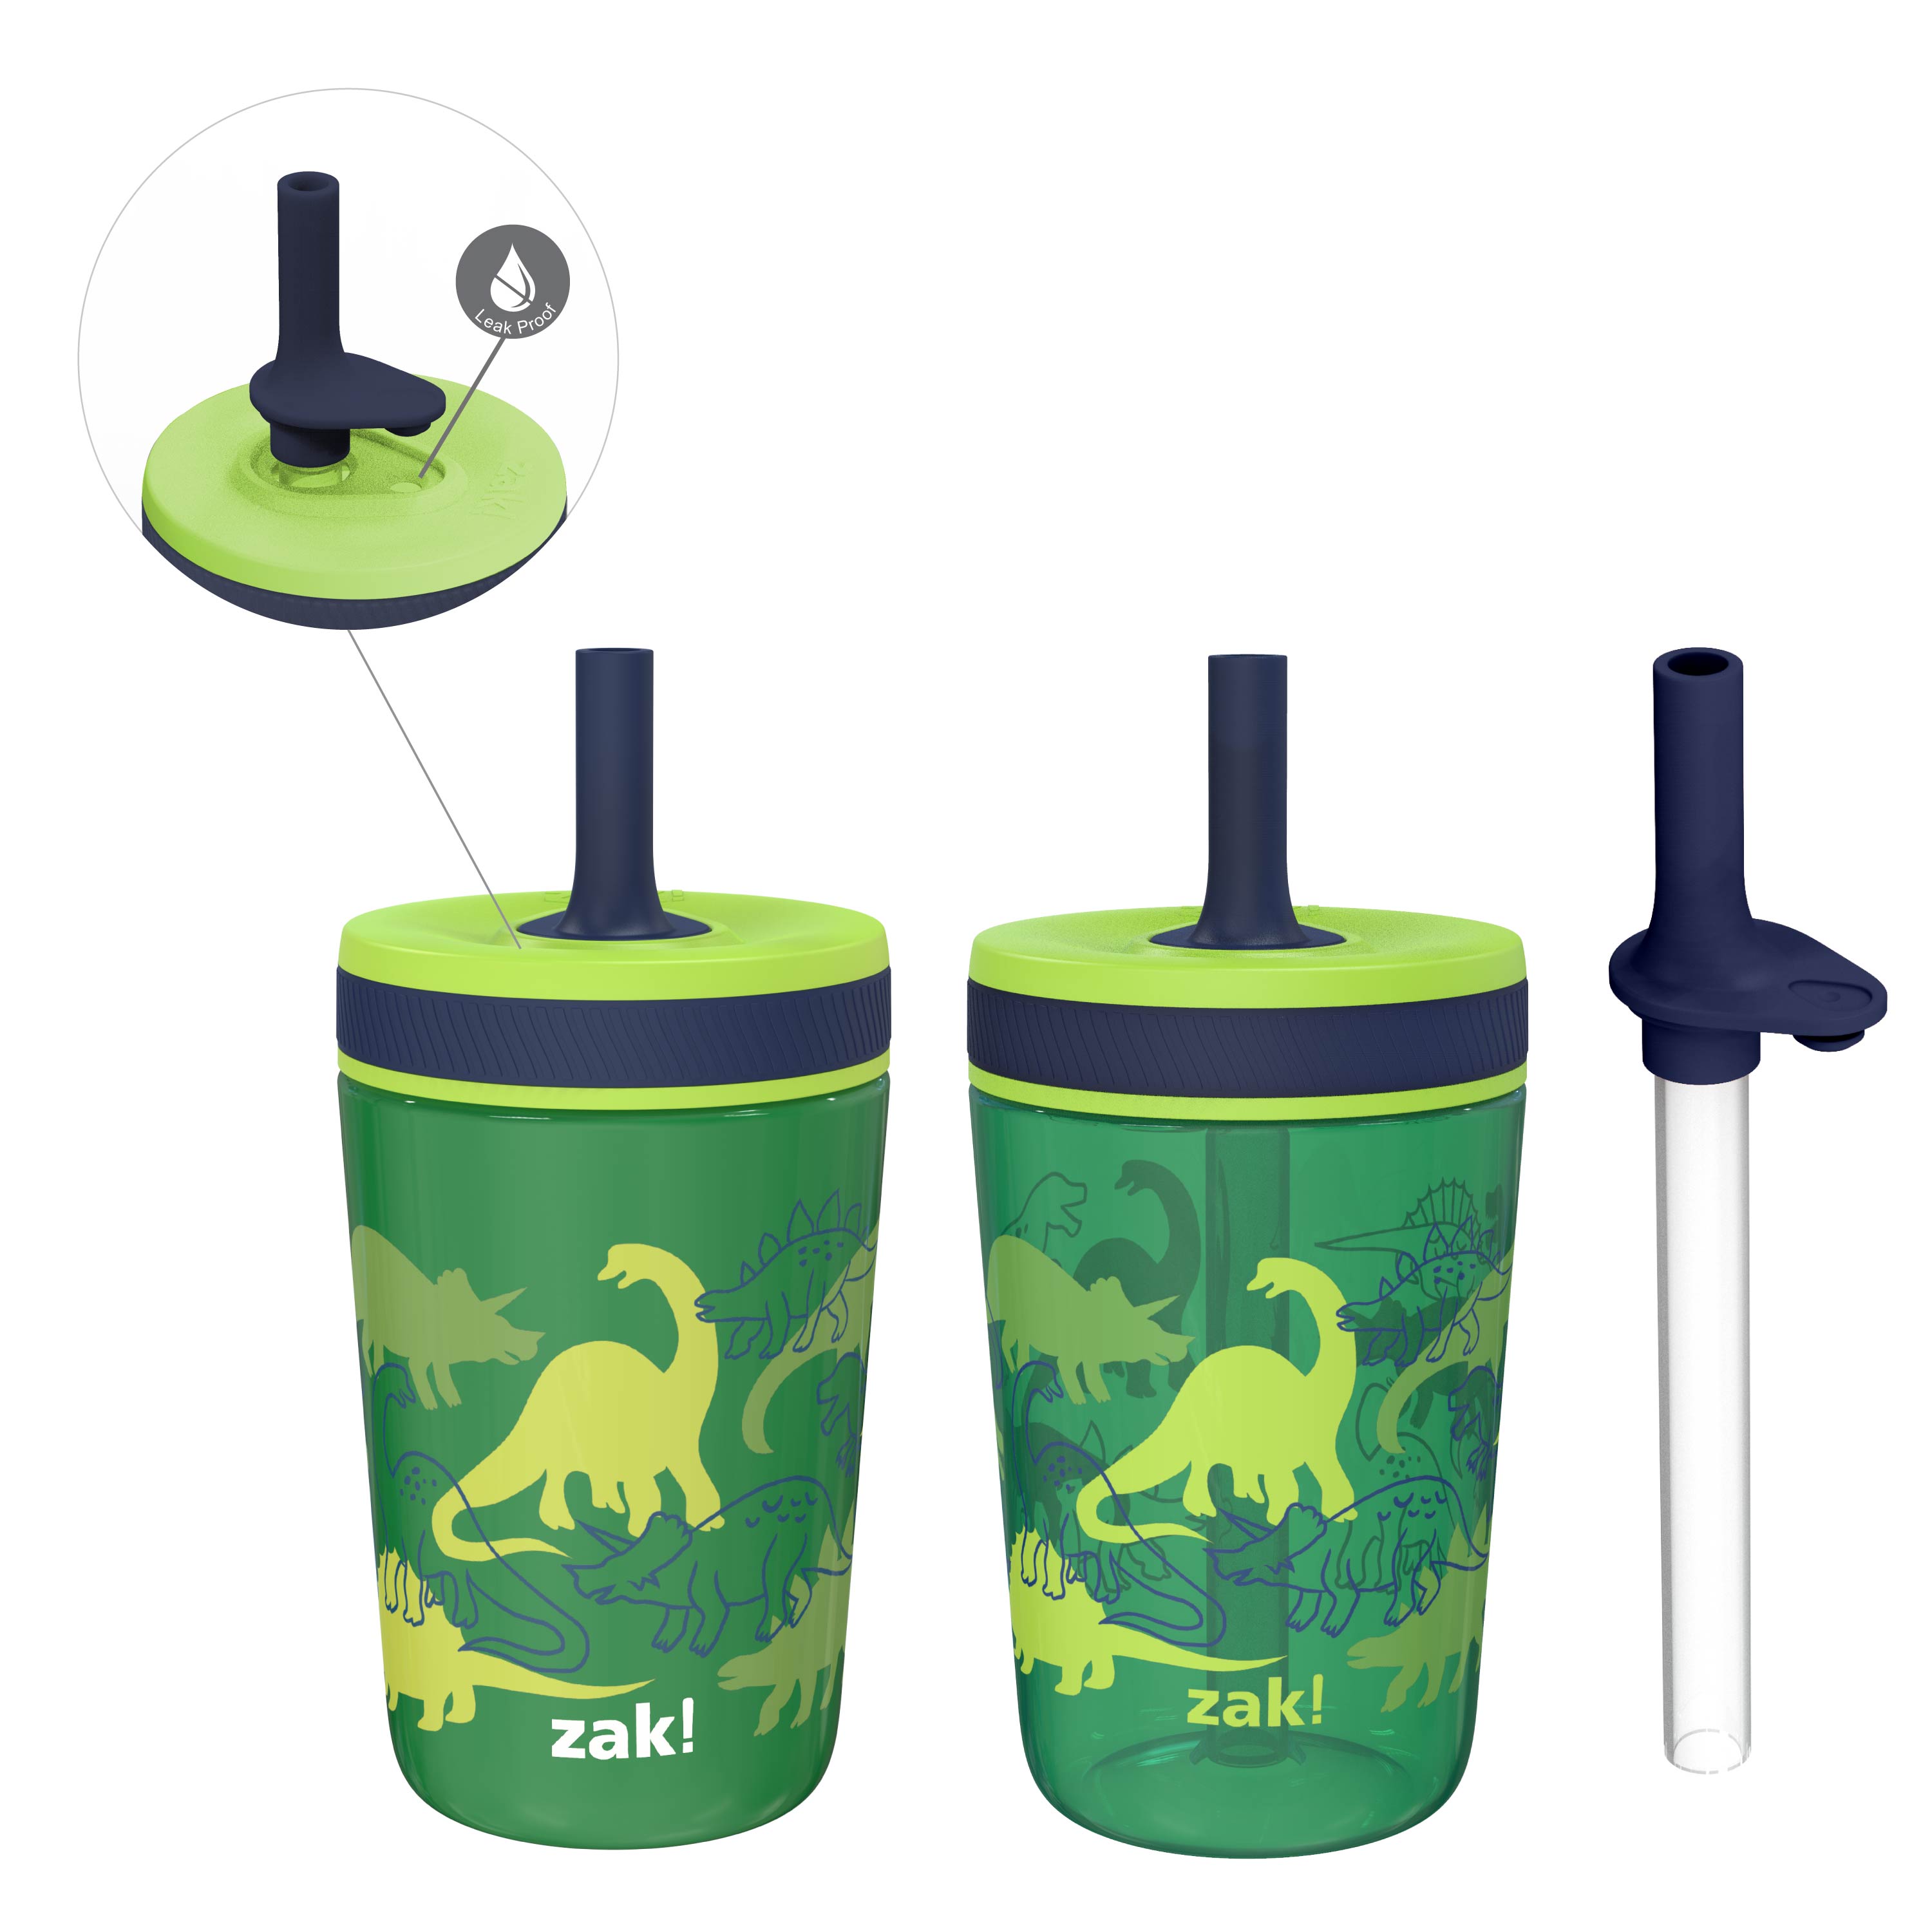 Stitch reusable kids cup with spill proof straw